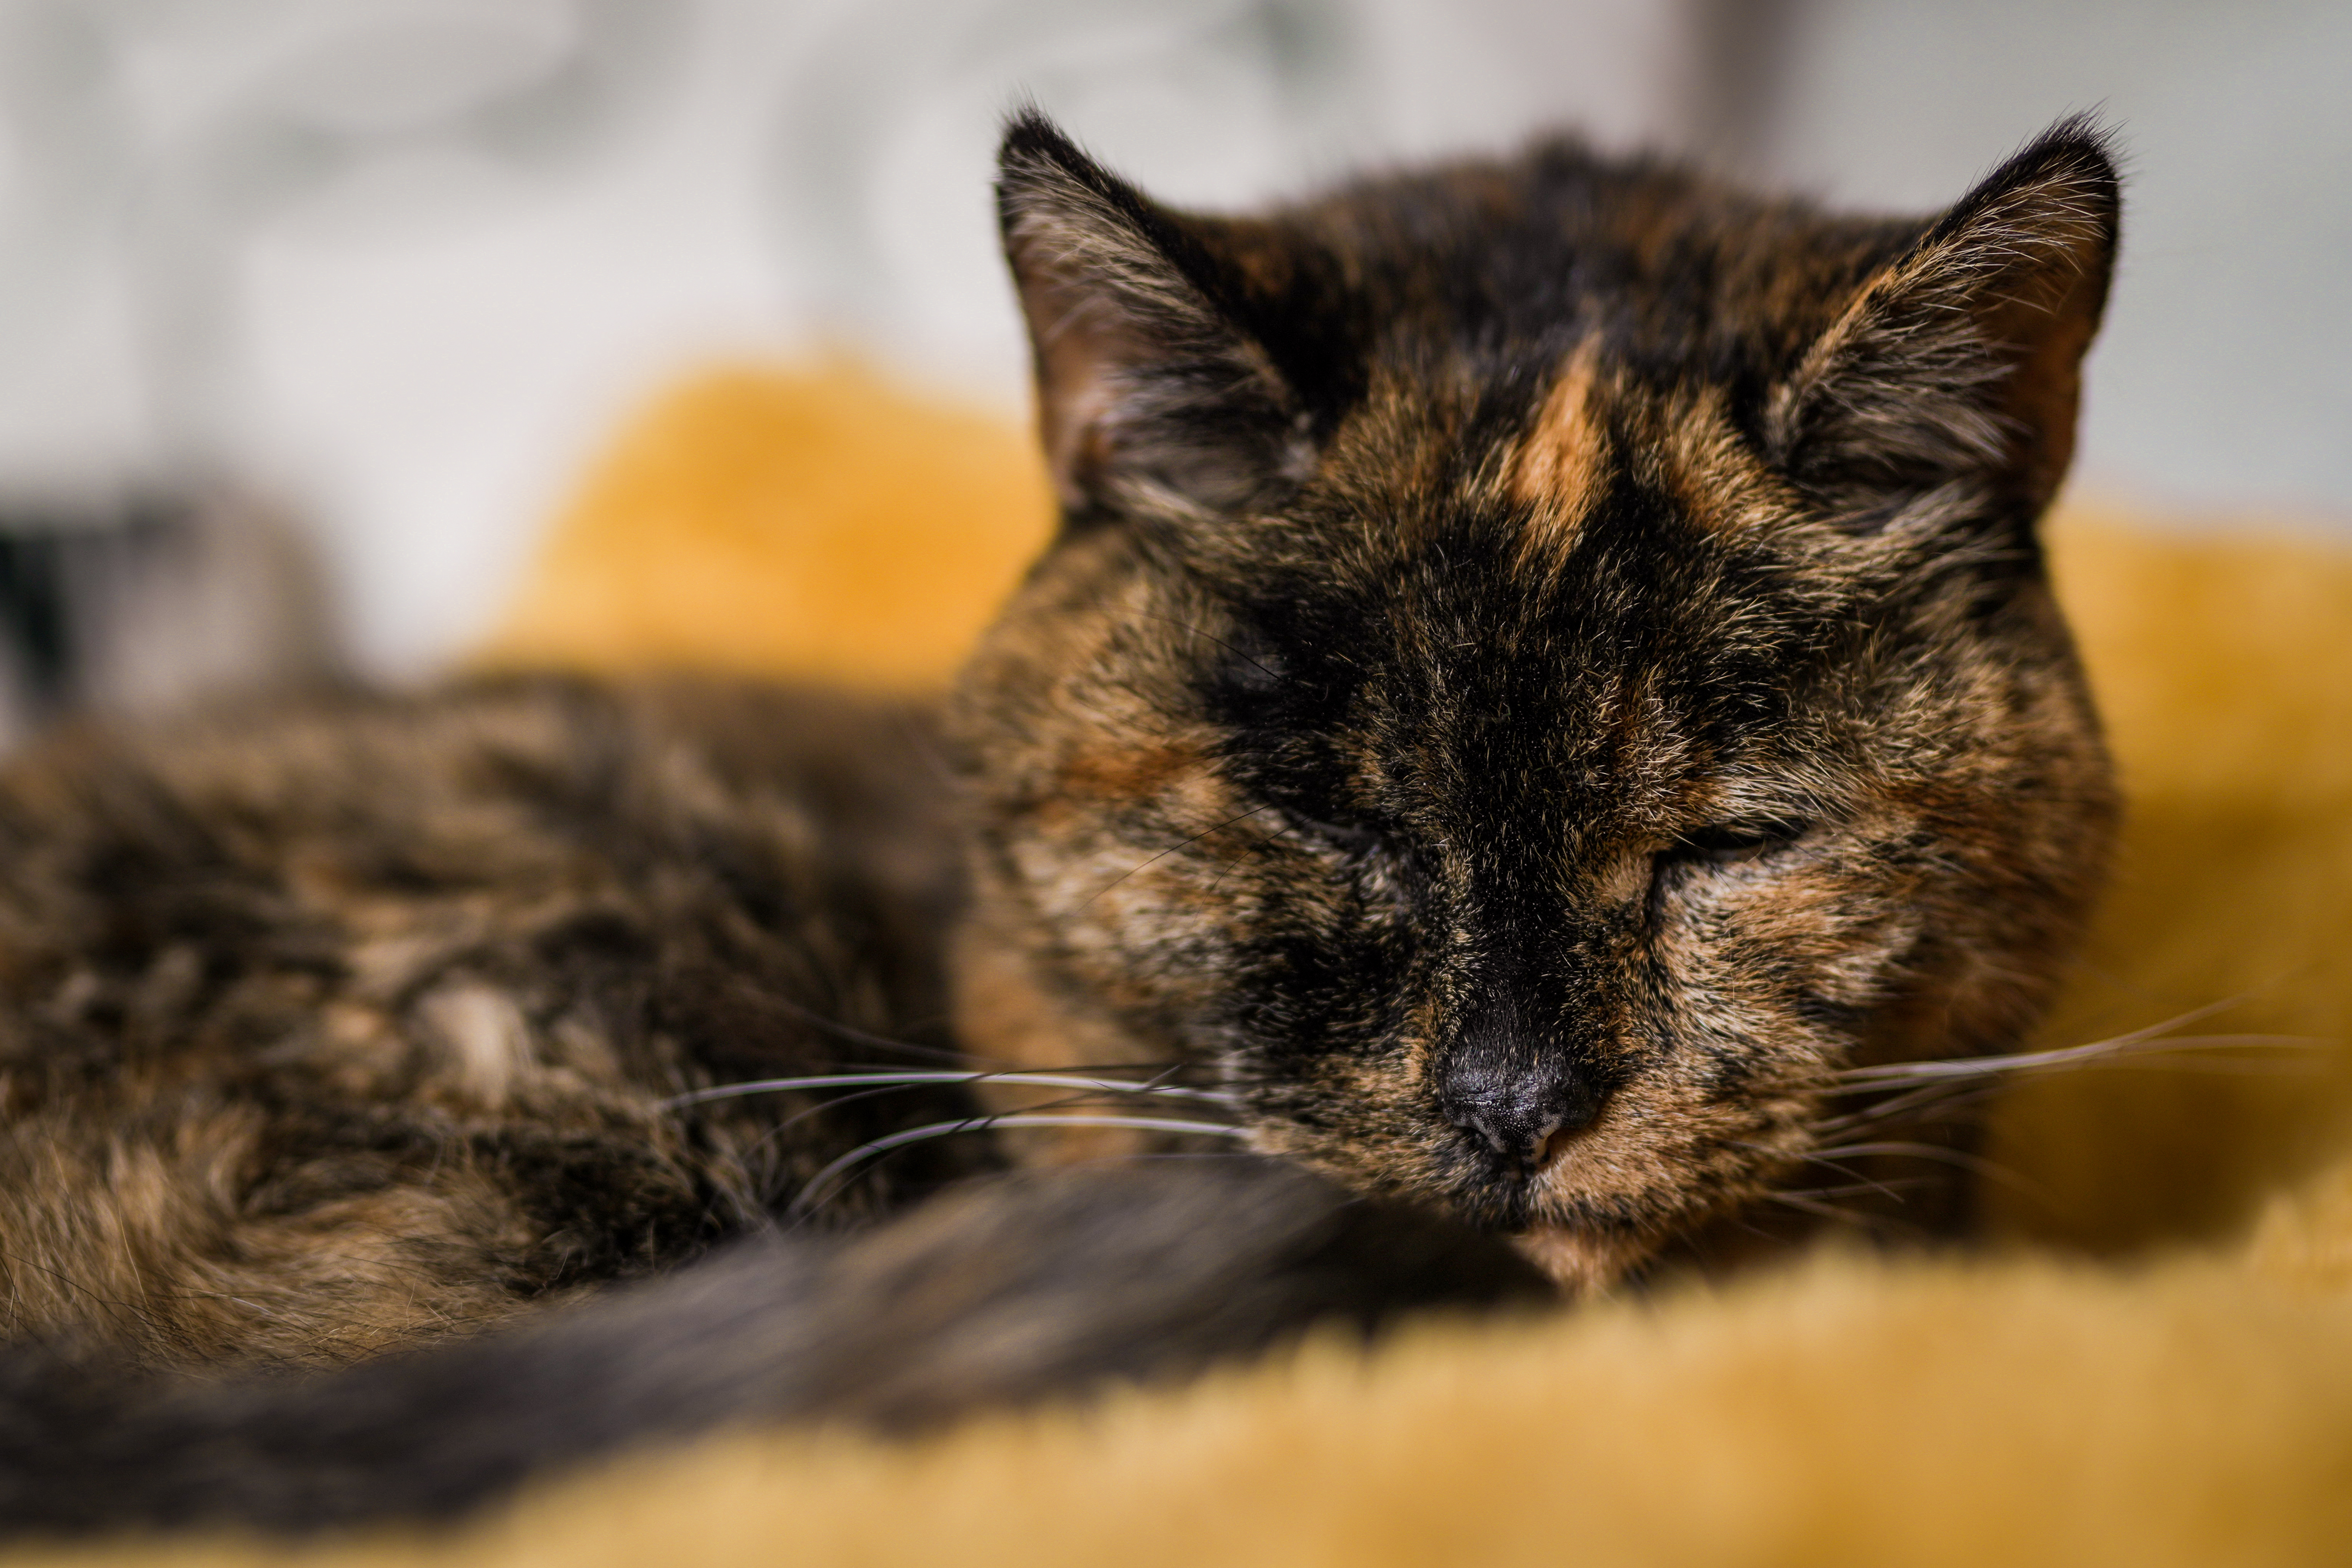 This is the world's oldest living cat, according to Guinness World Records  